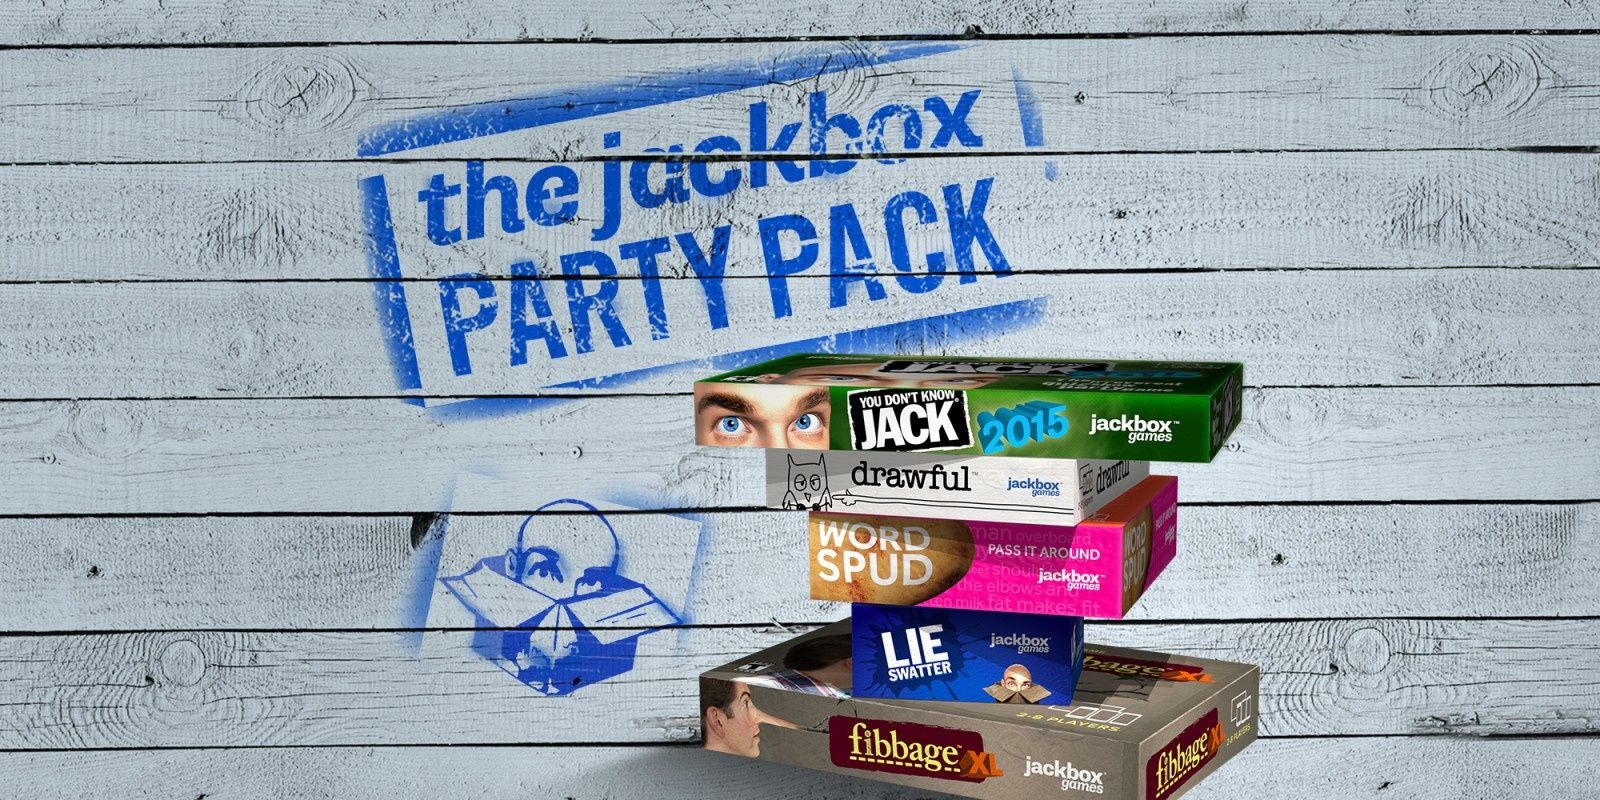 An image consisting packs of Jackbox Party series